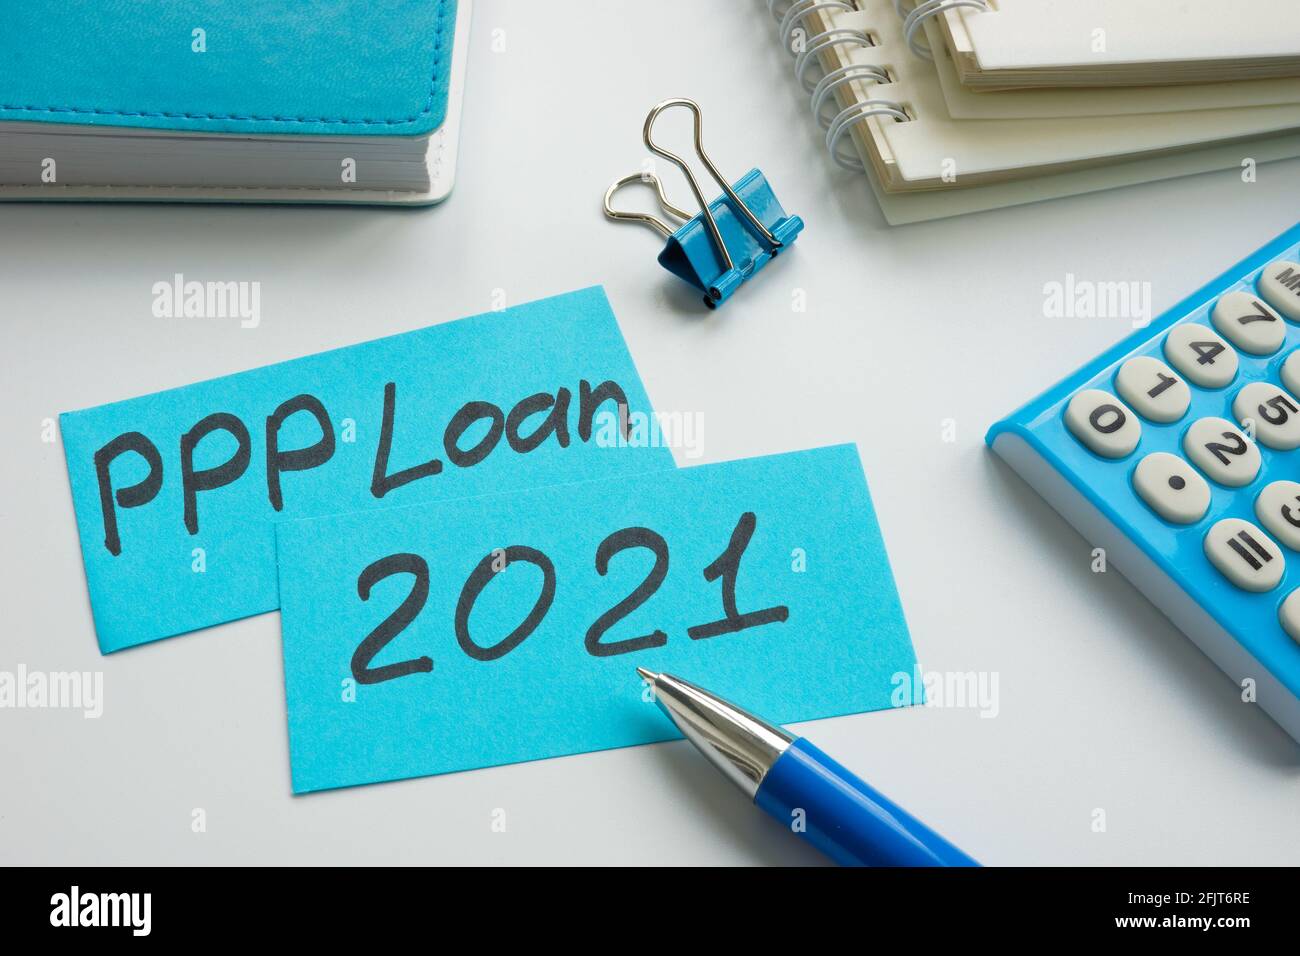 PPP loan 2021 words on the memo sticks. Stock Photo